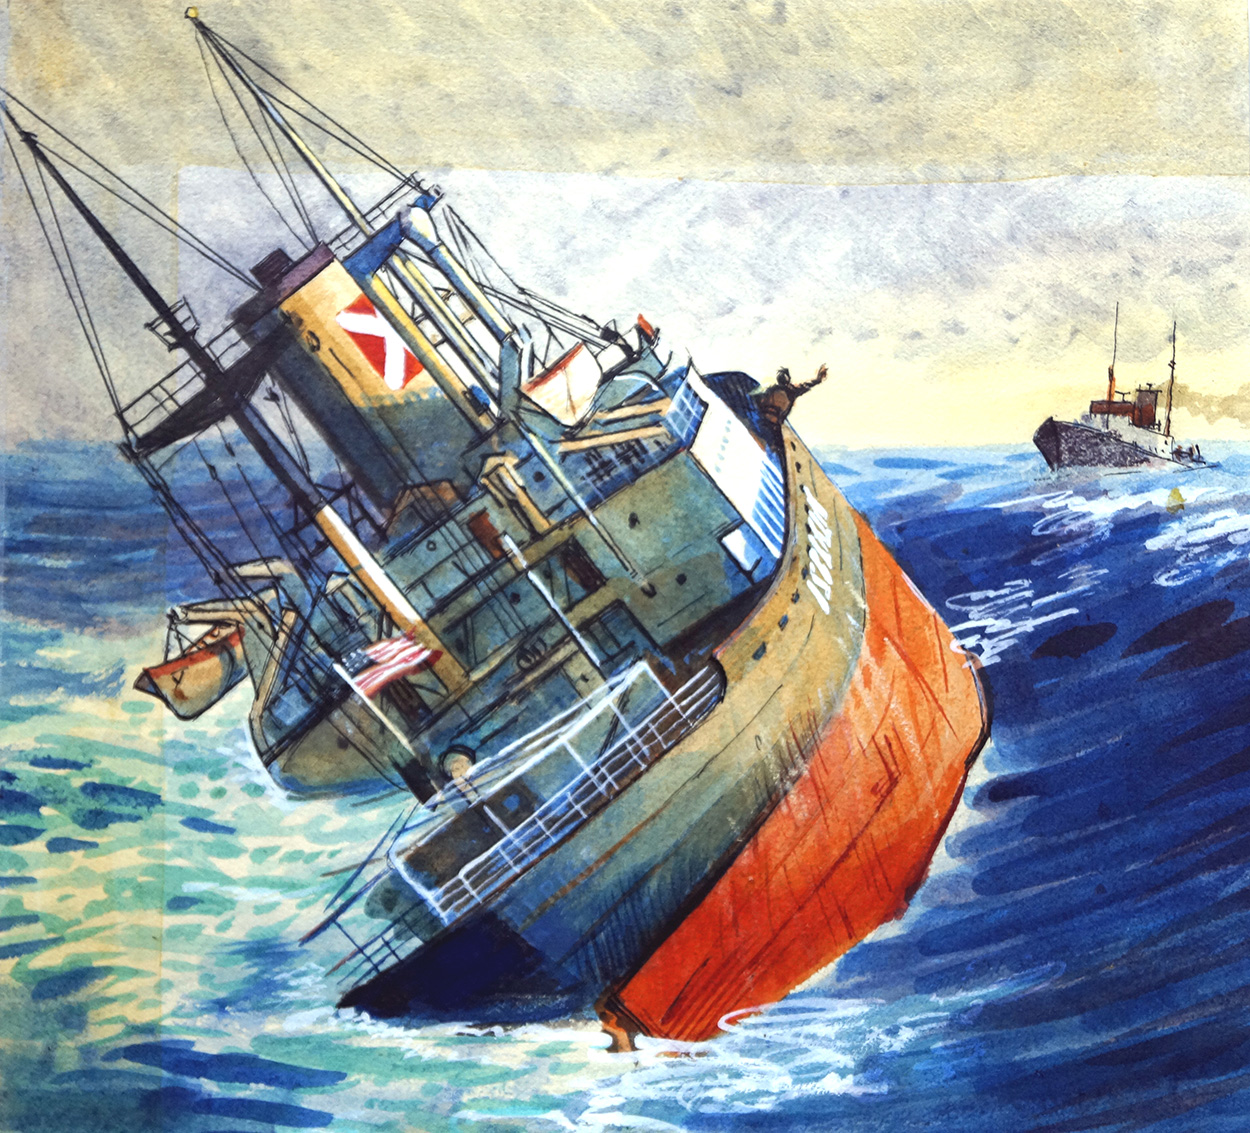 Those In Peril At Sea (Original) art by Eric Parker Art at The Illustration Art Gallery